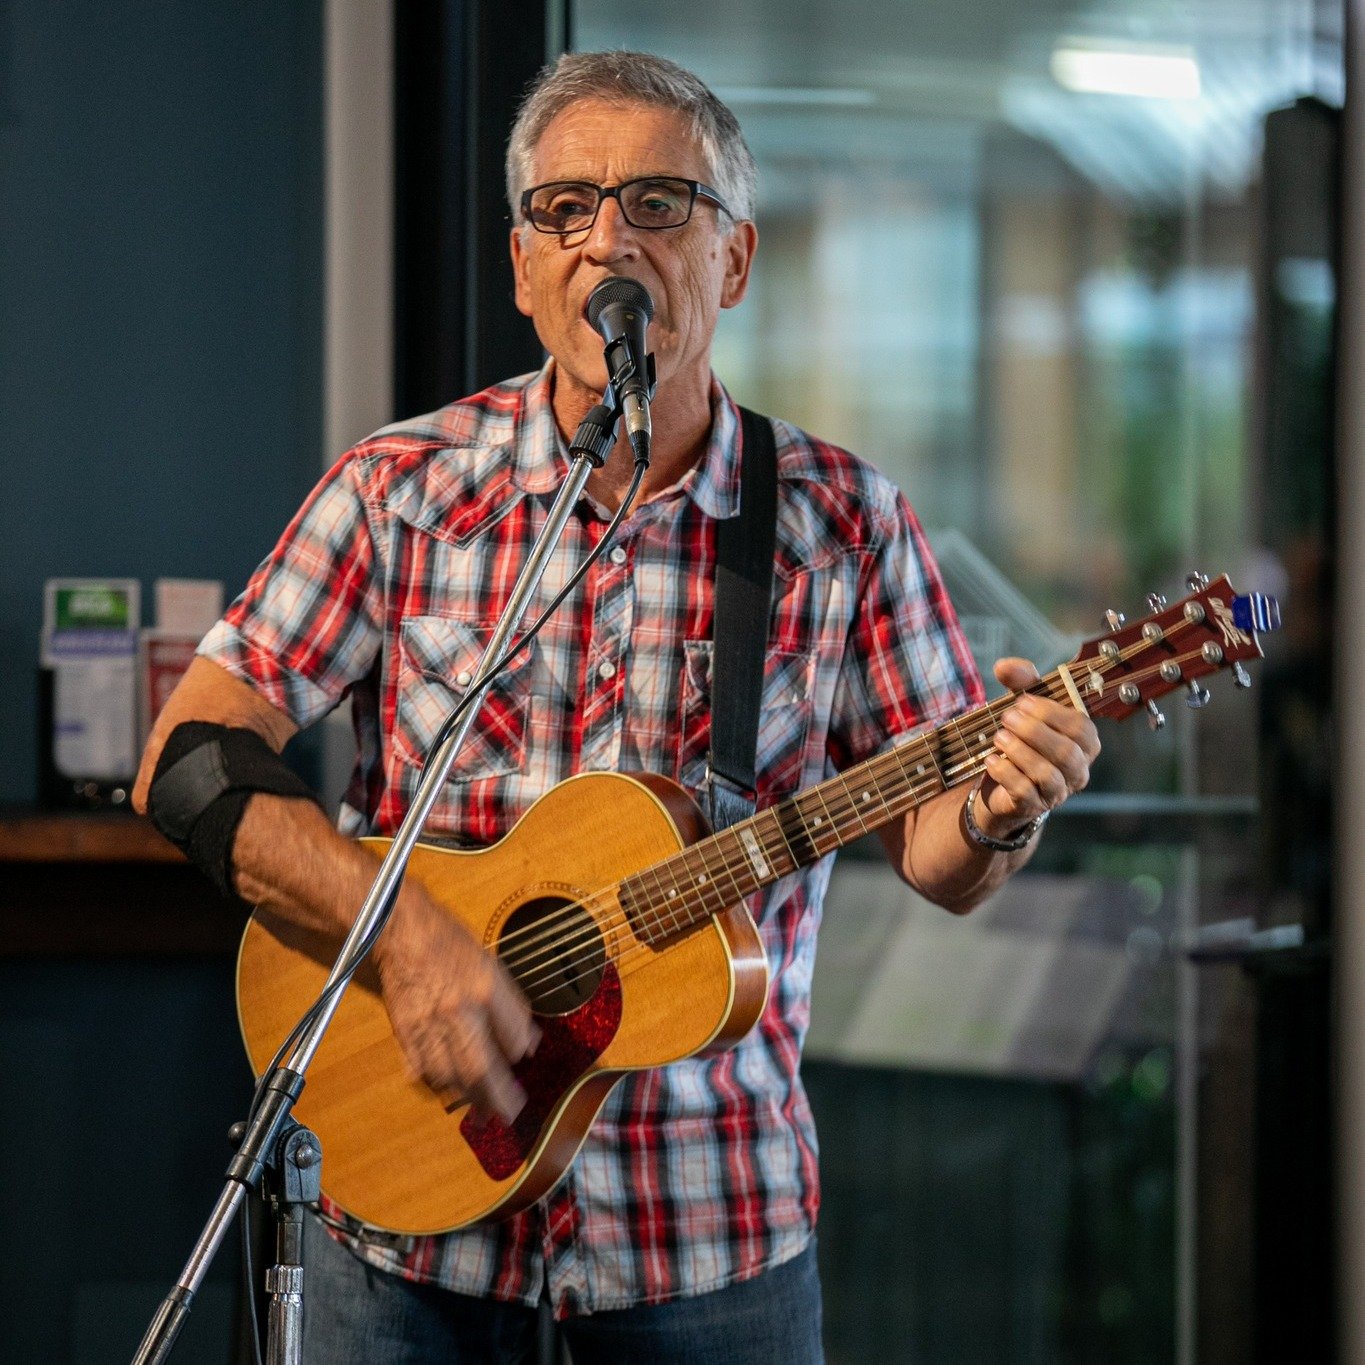 Head to Harwood Hotel this Sunday for live music from 1pm and all-around afternoon vibes!

Make a booking now through the link in our bio or call (02) 6646 4223

#HarwoodHotel #VisitNSW #CountryPub